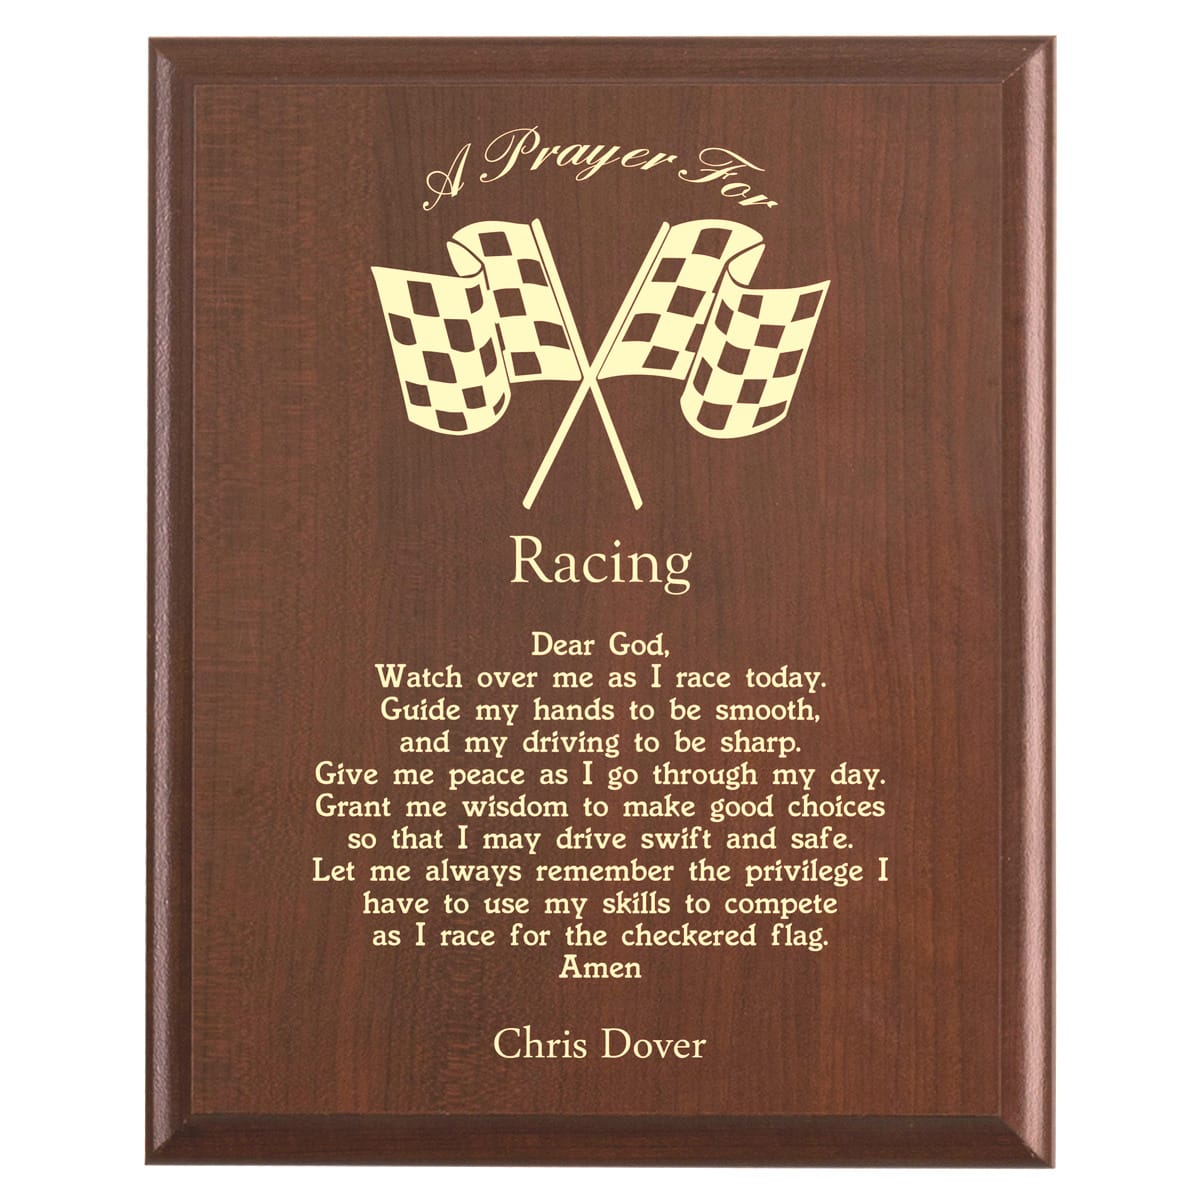 Plaque photo: Car Racing Prayer Plaque design with free personalization. Wood style finish with customized text.